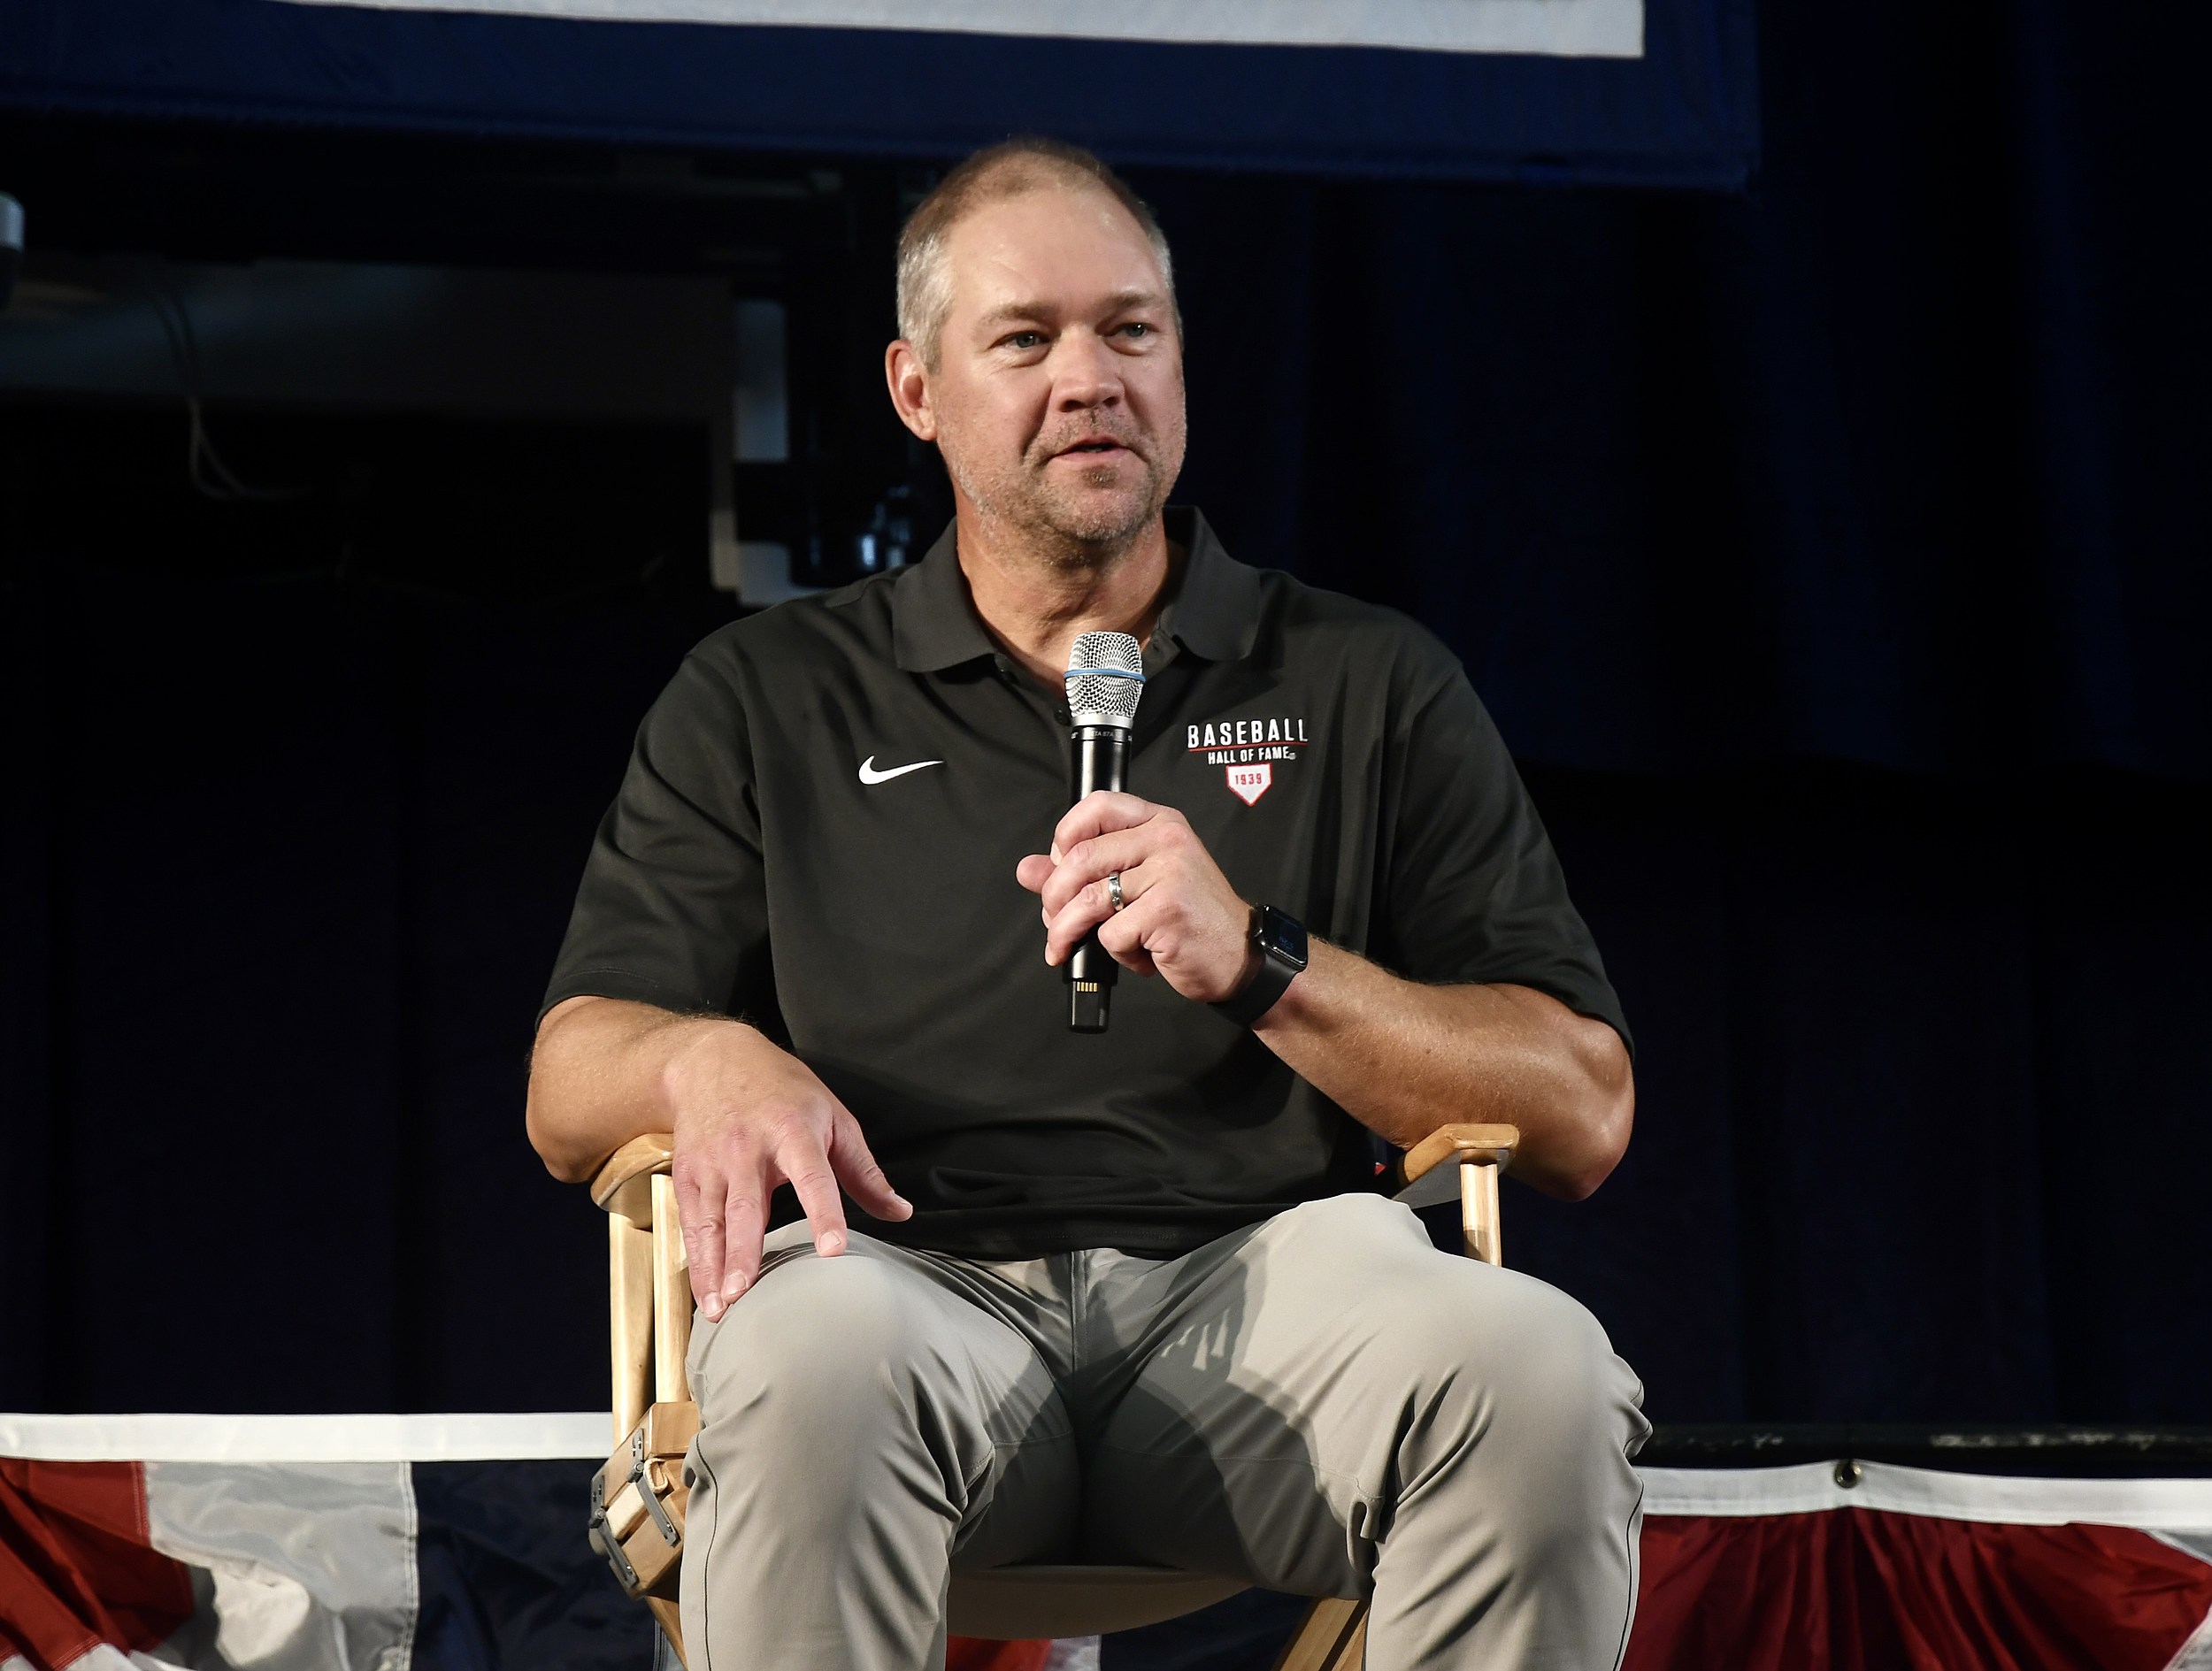 Indiana native Scott Rolen inducted into the Baseball Hall of Fame